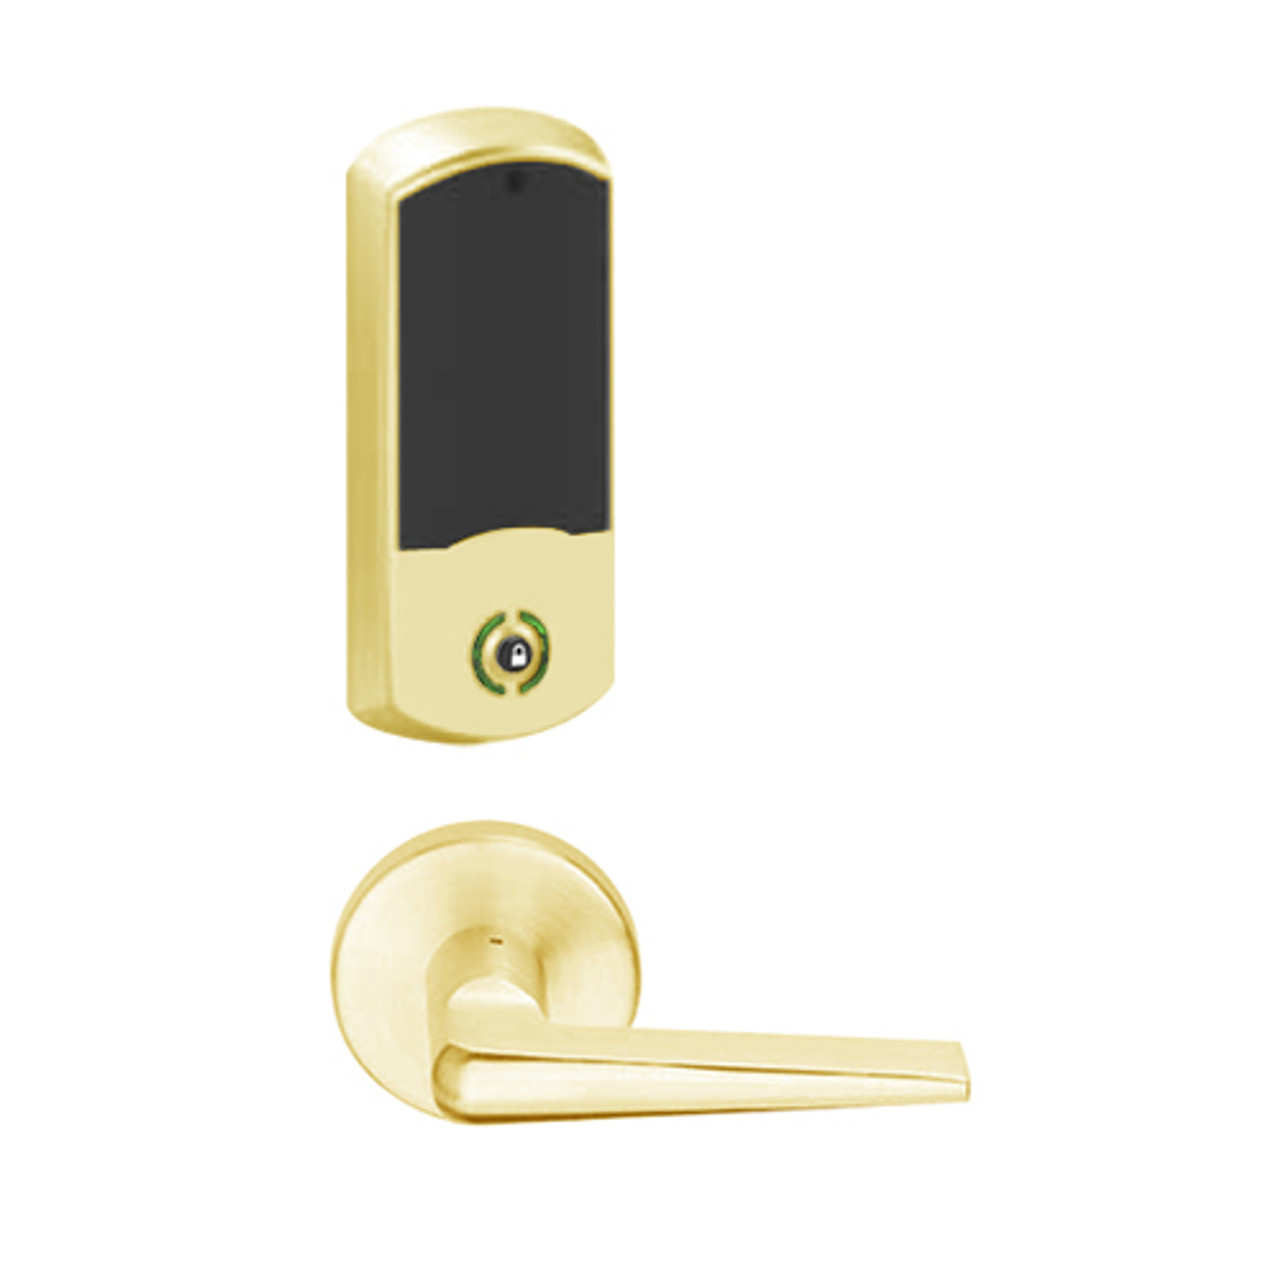 LEMB-GRW-J-05-605-00C Schlage Privacy/Office Wireless Greenwich Mortise Lock with Push Button & LED Indicator and 05 Lever Prepped for FSIC in Bright Brass